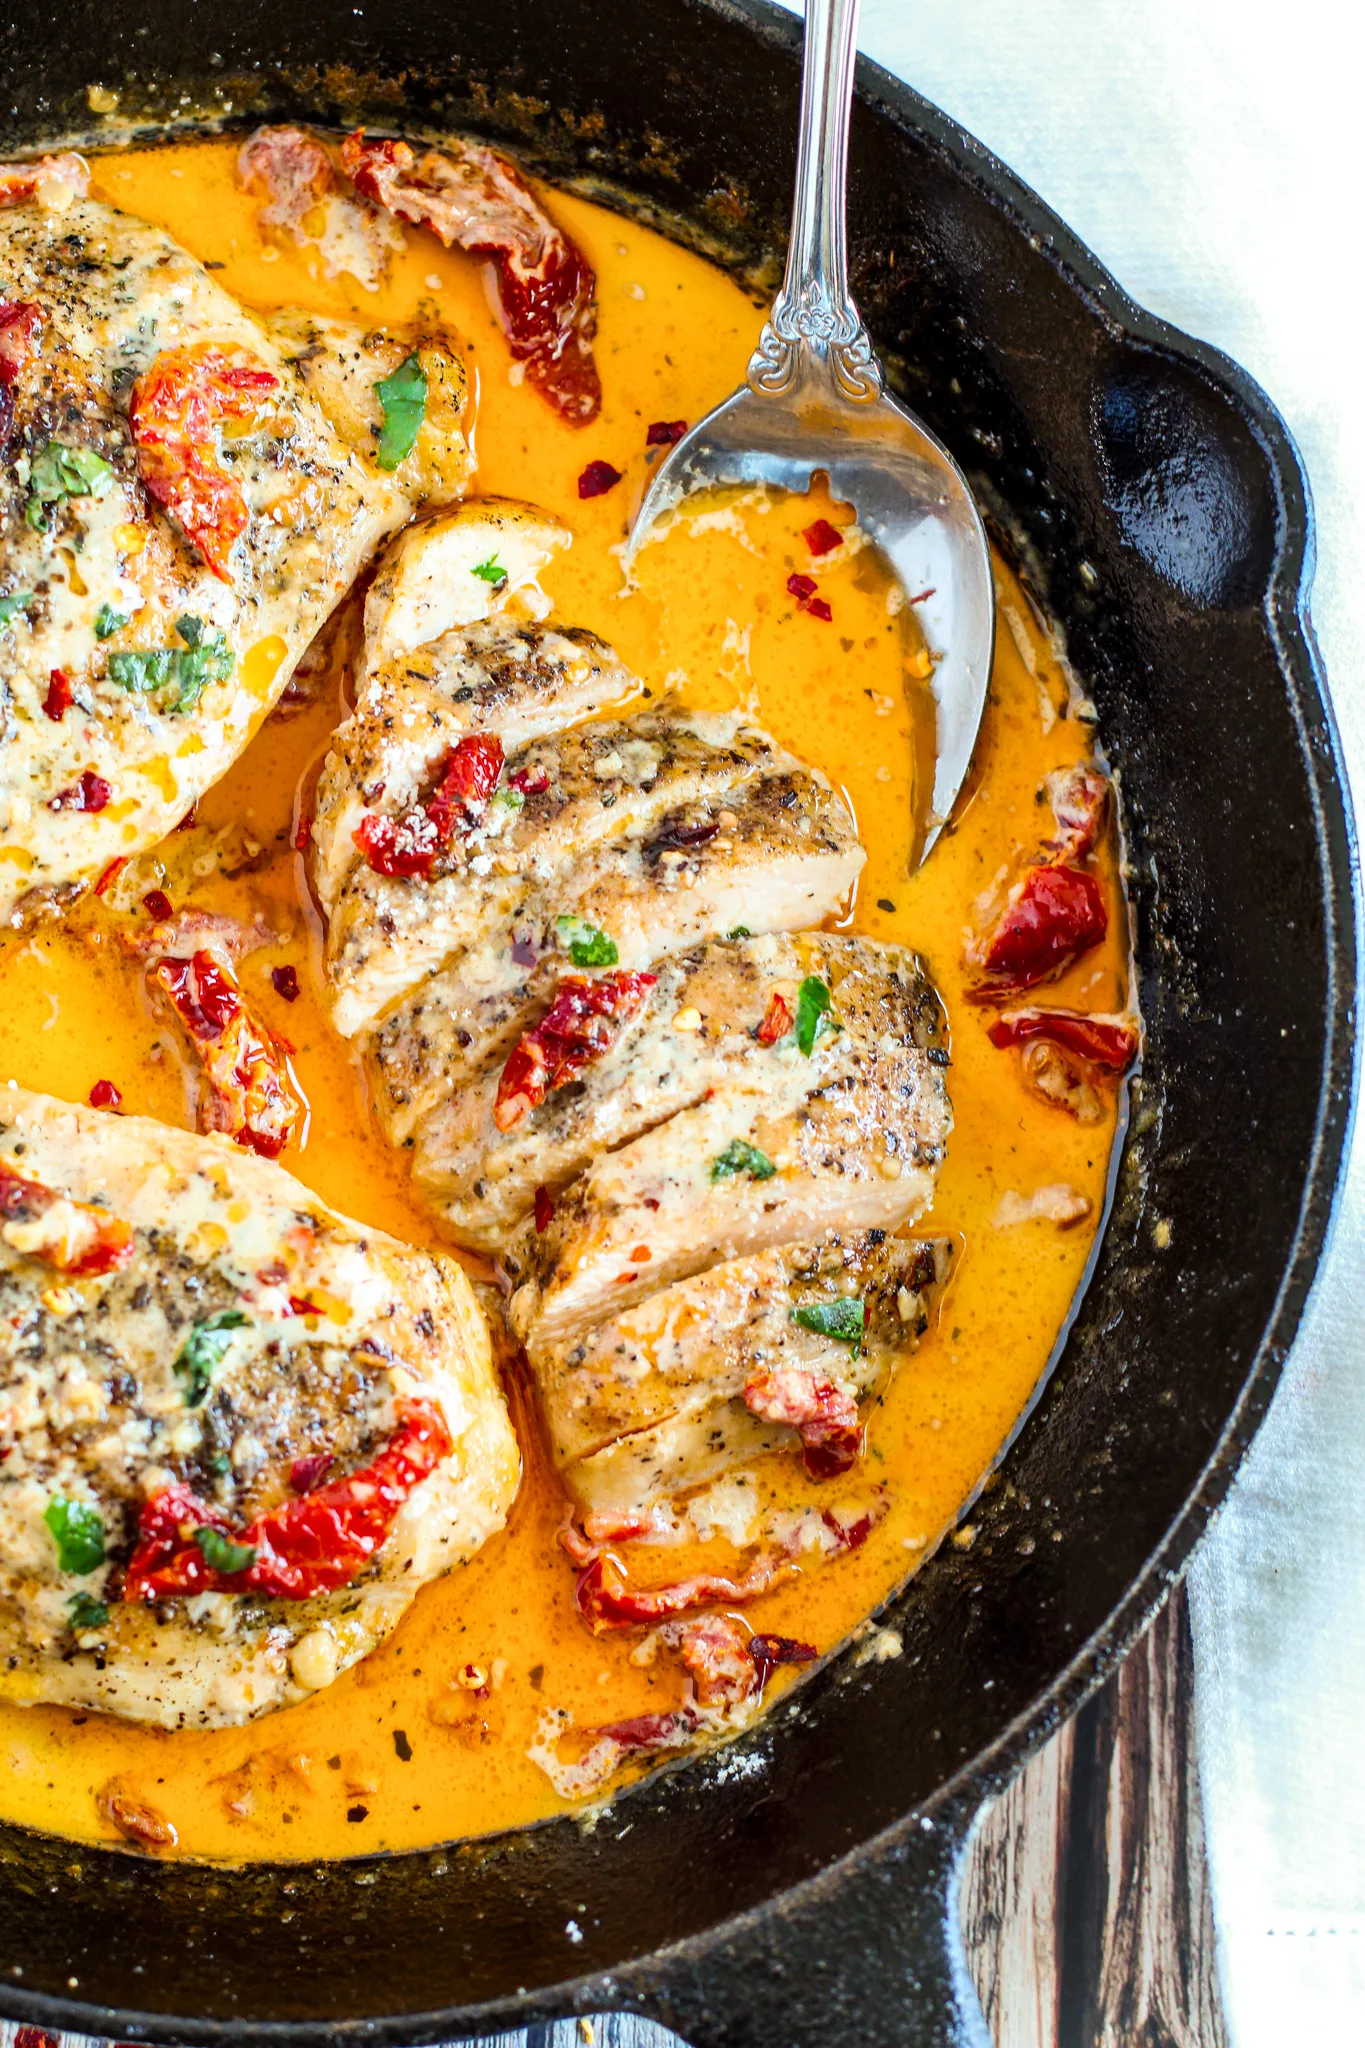 Eatingworks chicken breast recipes round up.